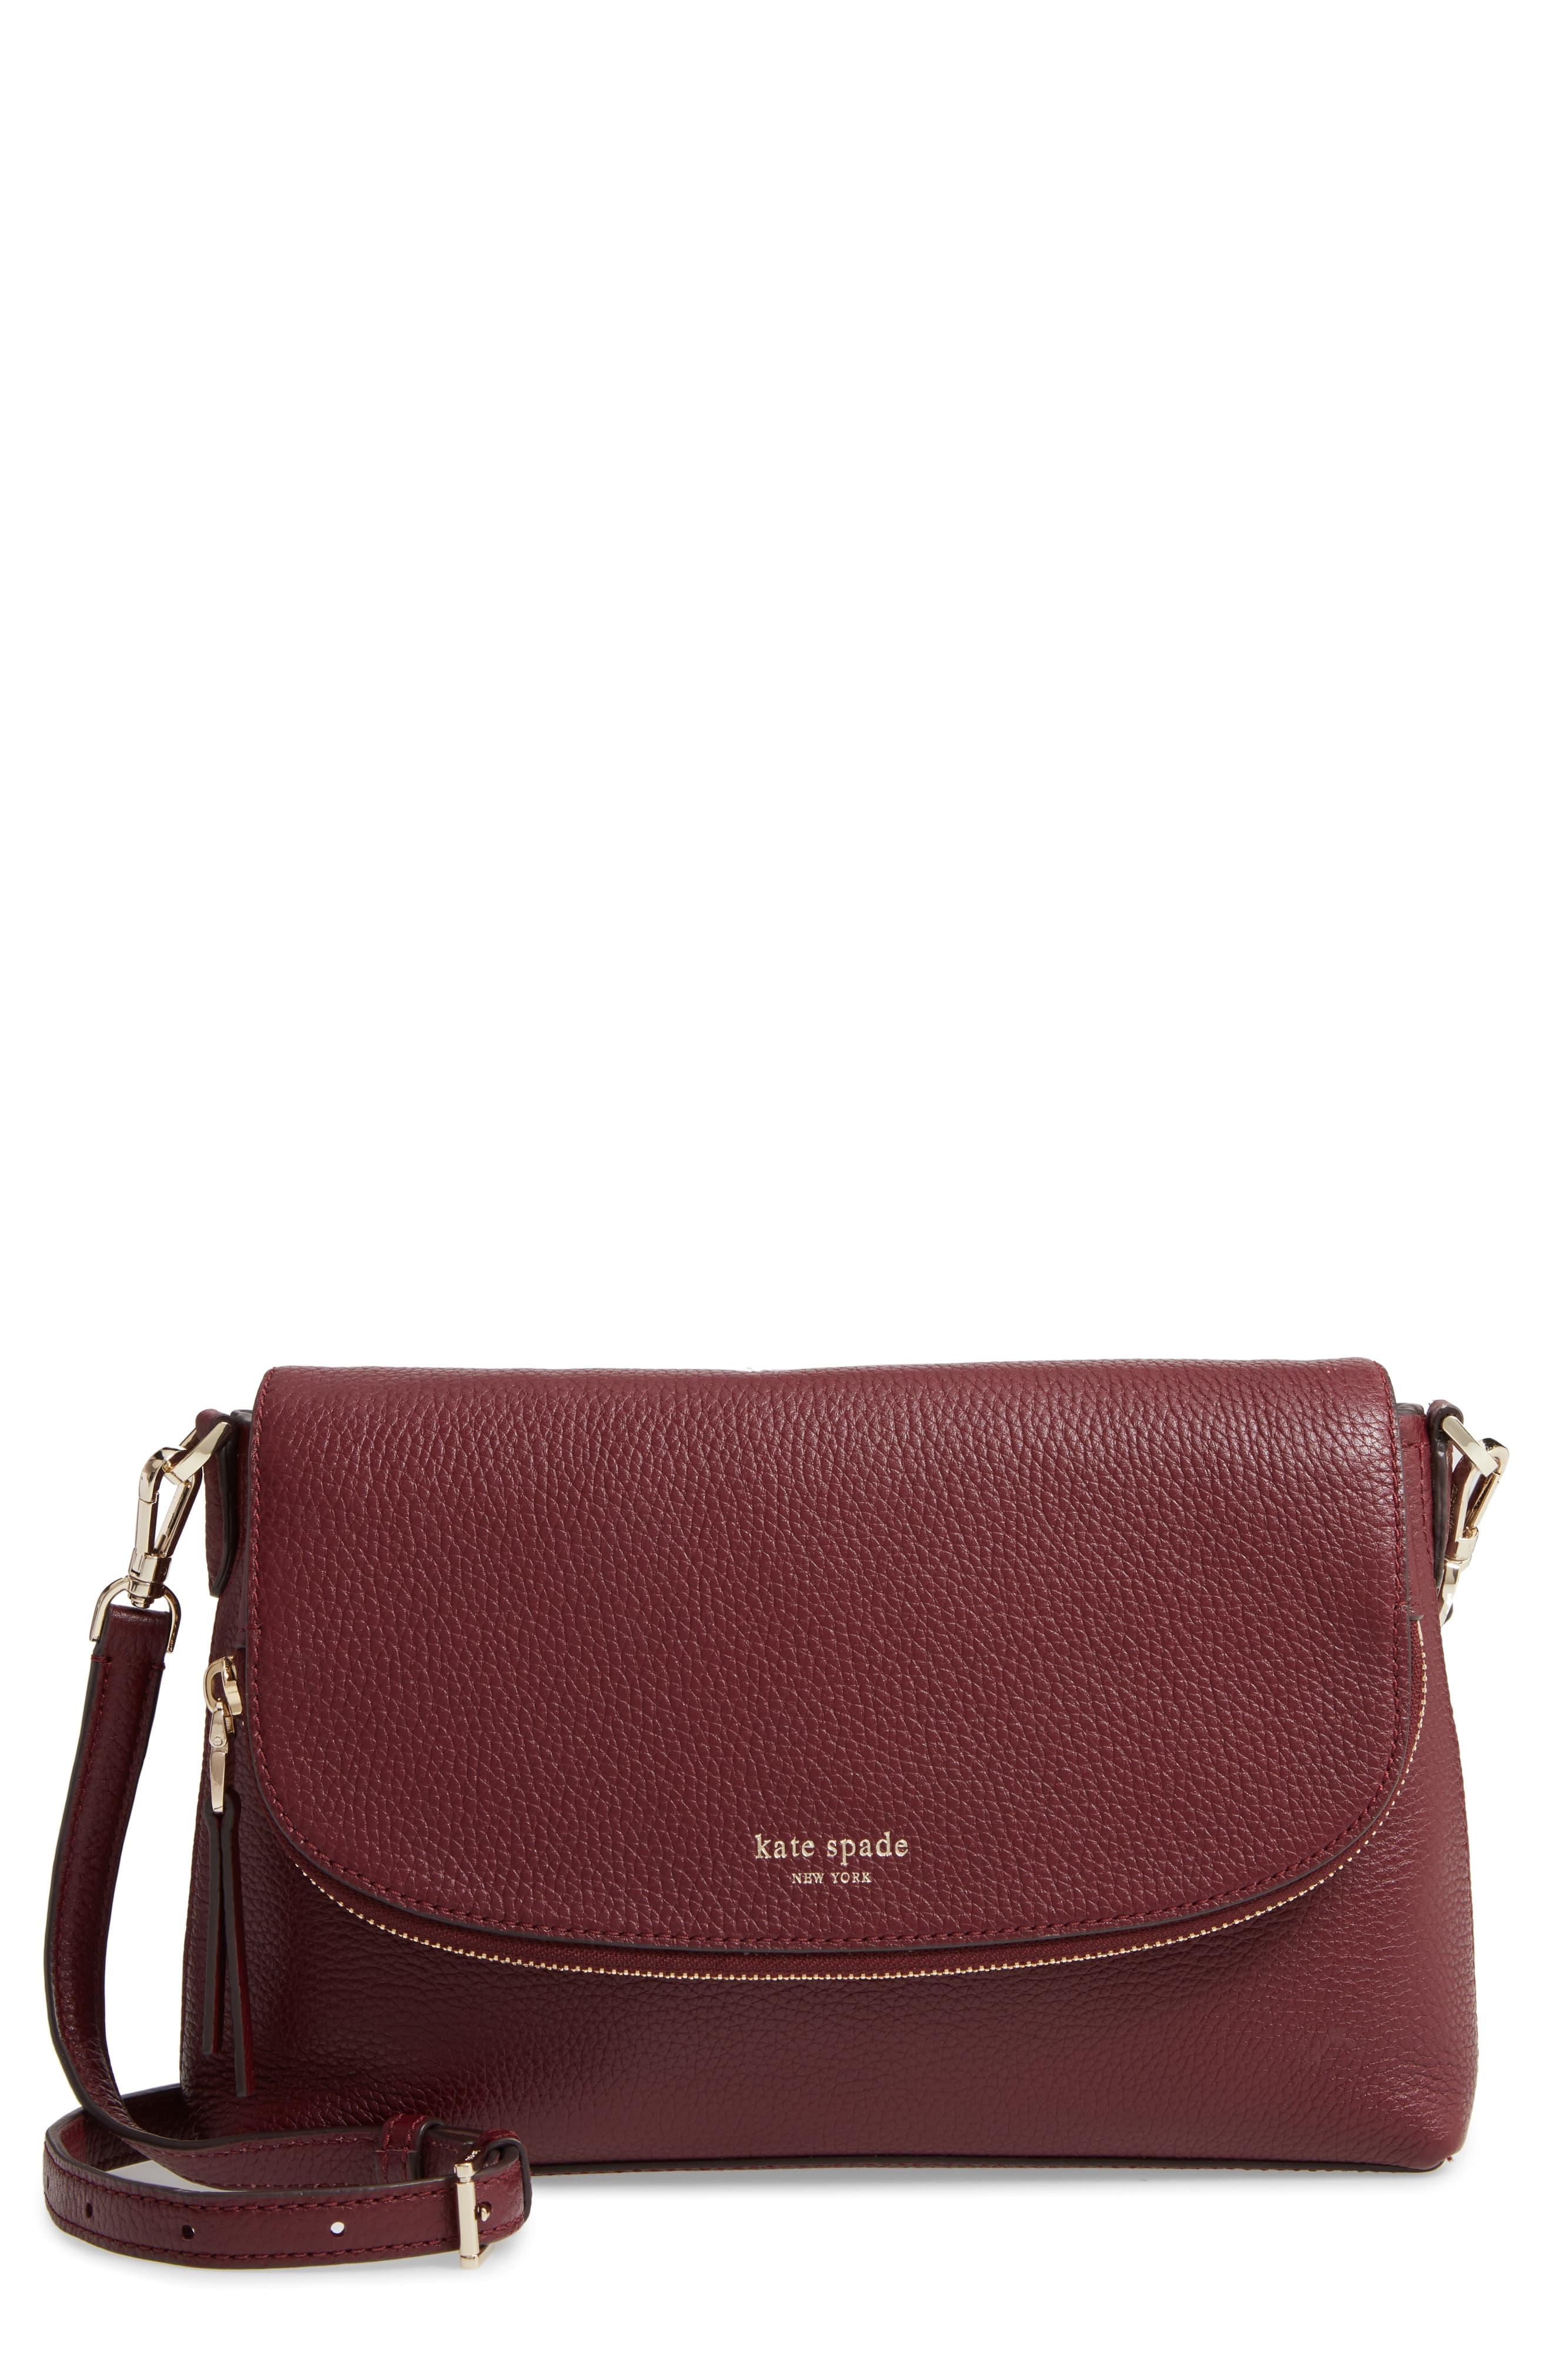 Kate Spade Large Polly Leather Crossbody Bag - Lyst